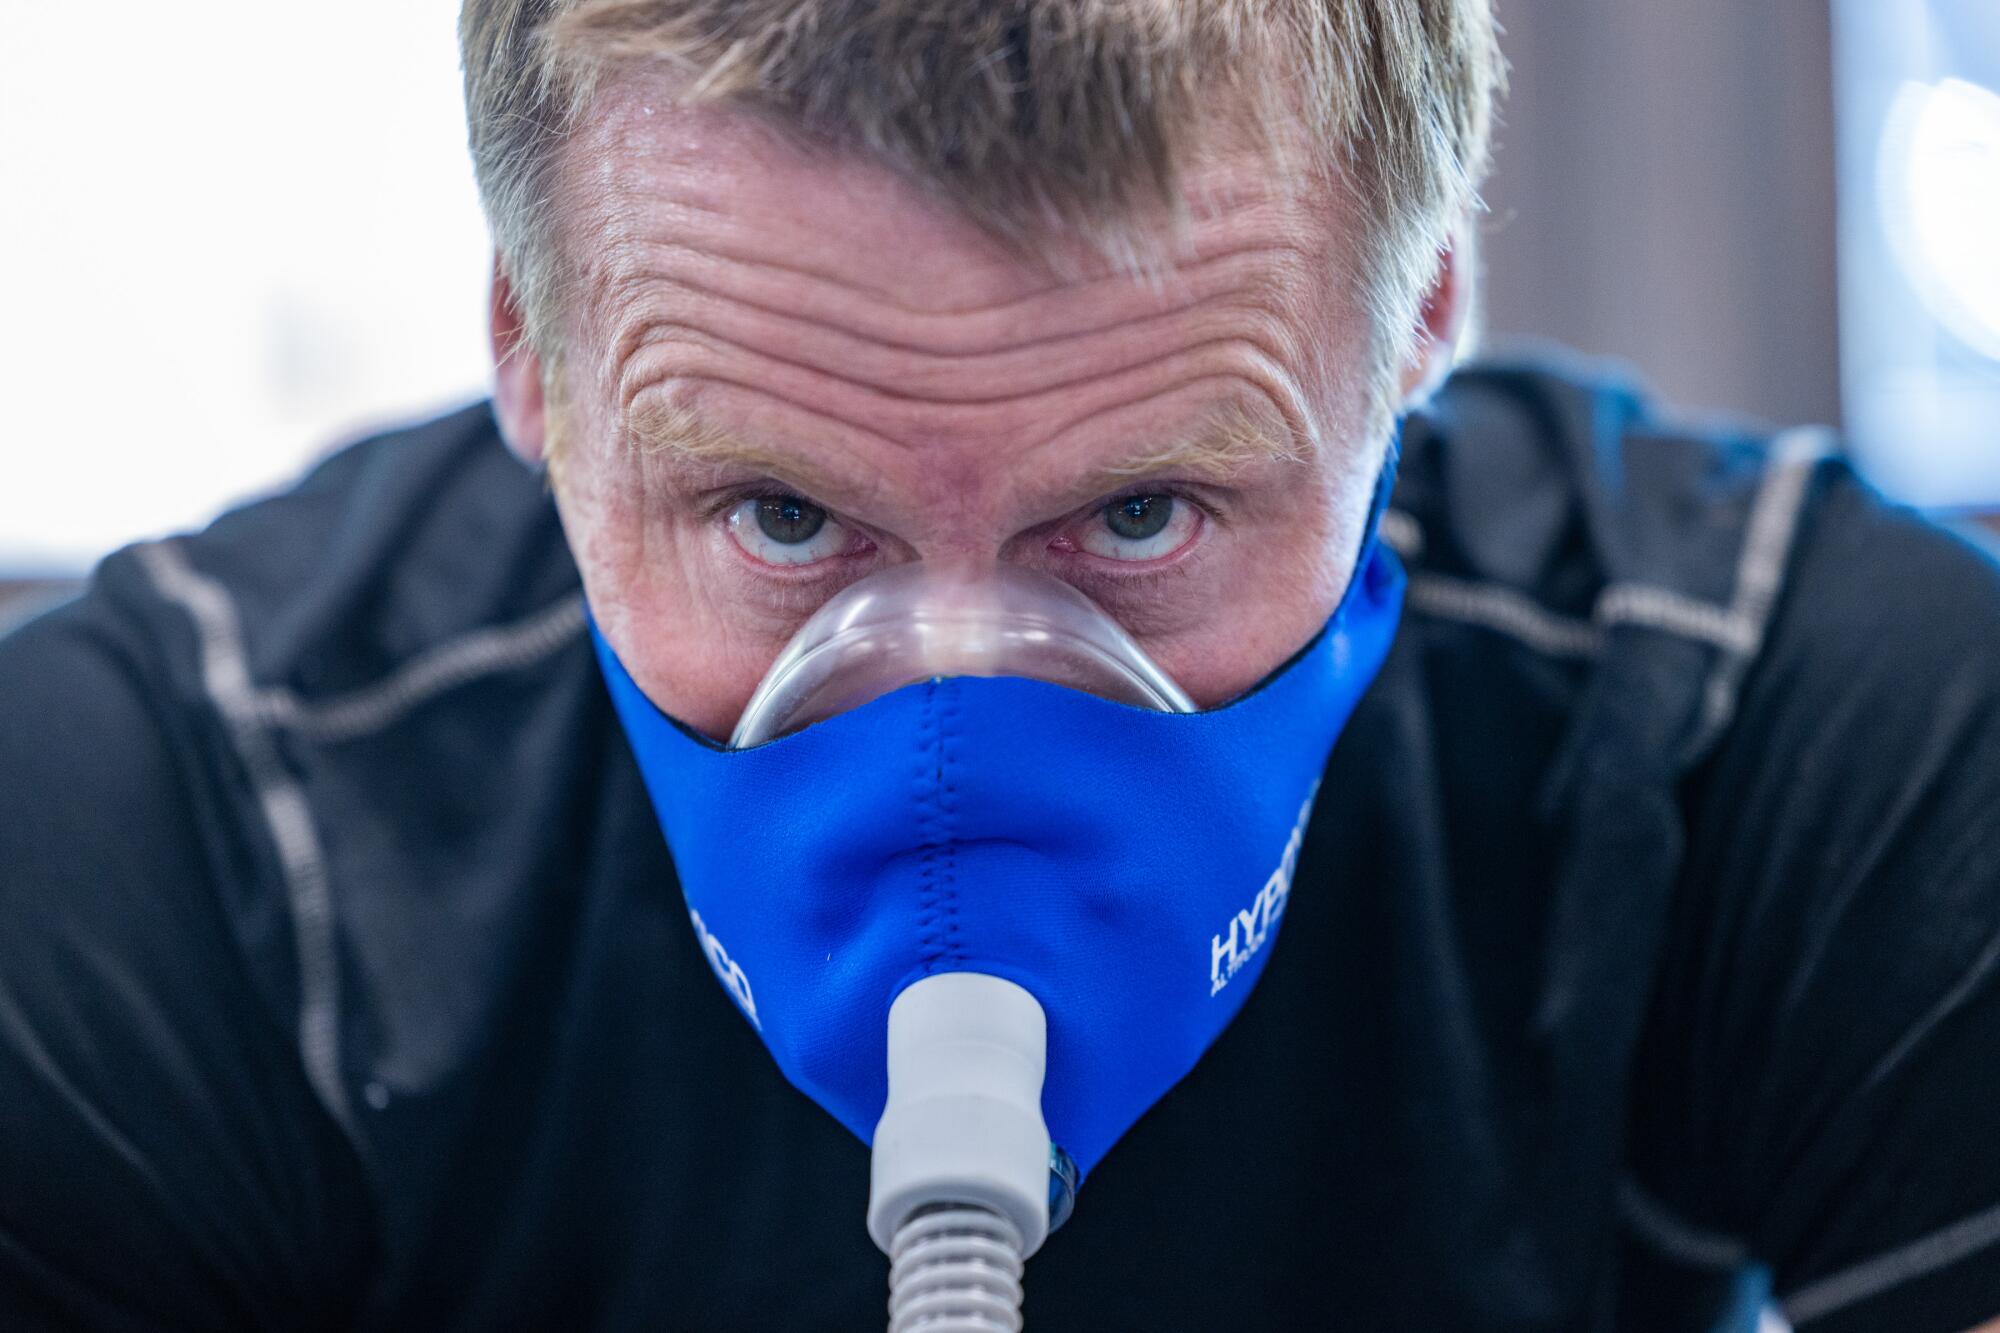 A man wears a blue air mask while exercising.